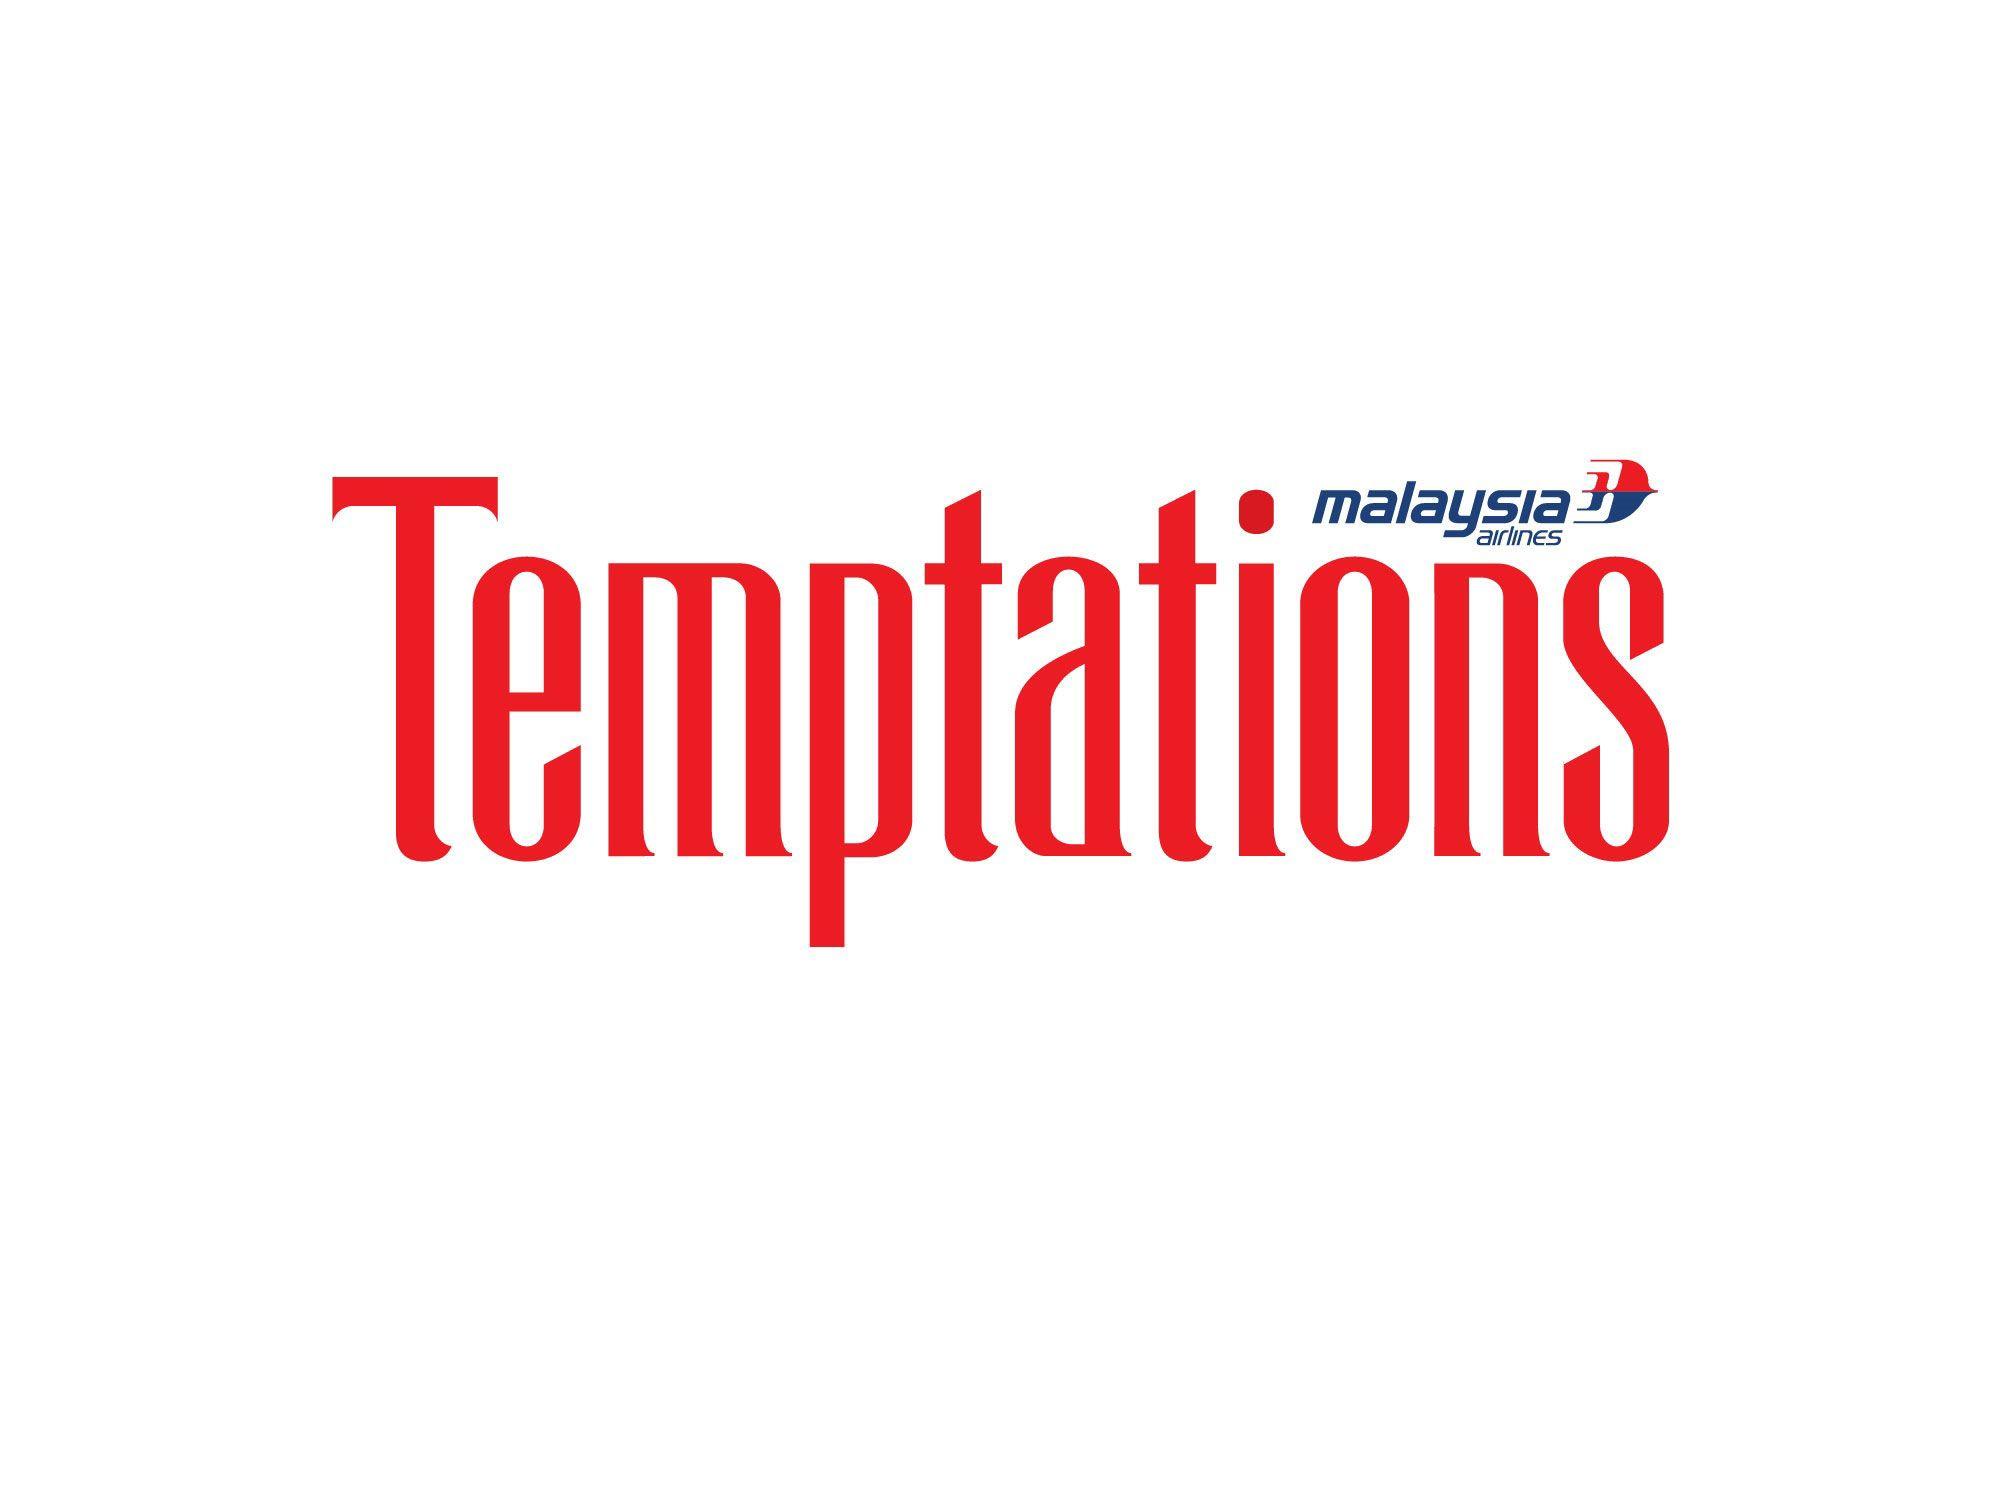 Malaysian Airlines Logo - Temptations In-flight Shopping